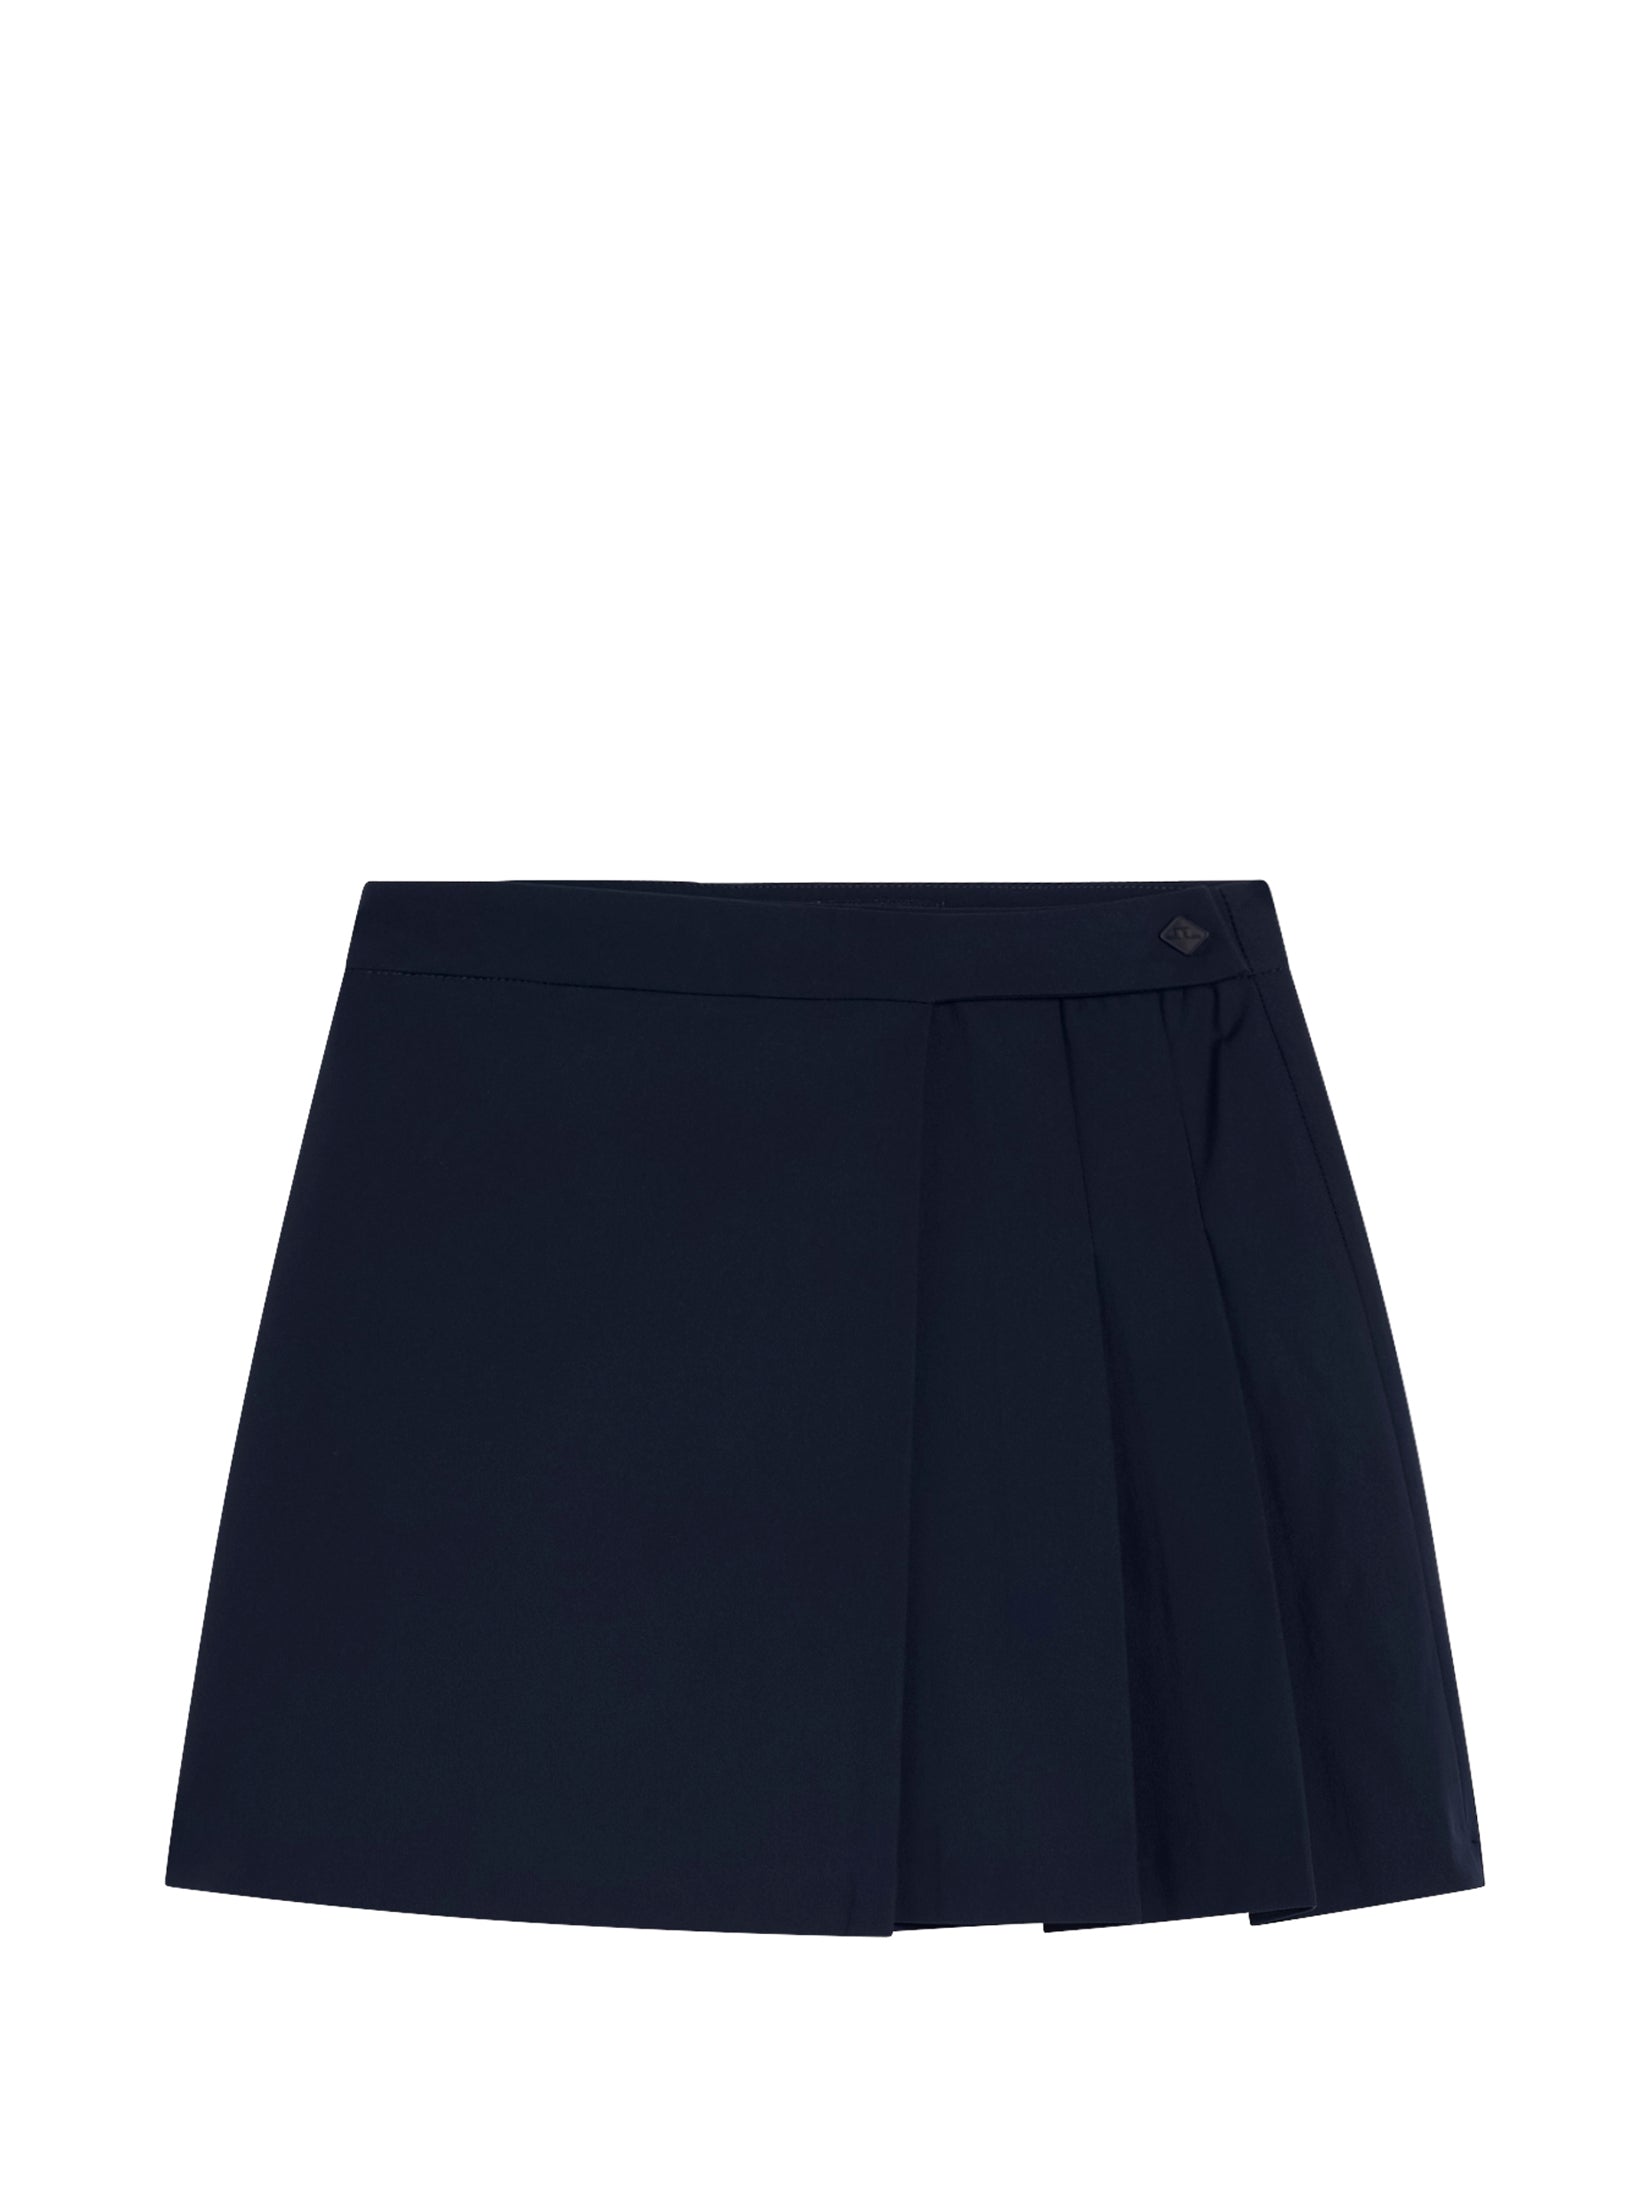 Pleated navy skirt by Belati– Flying Colors